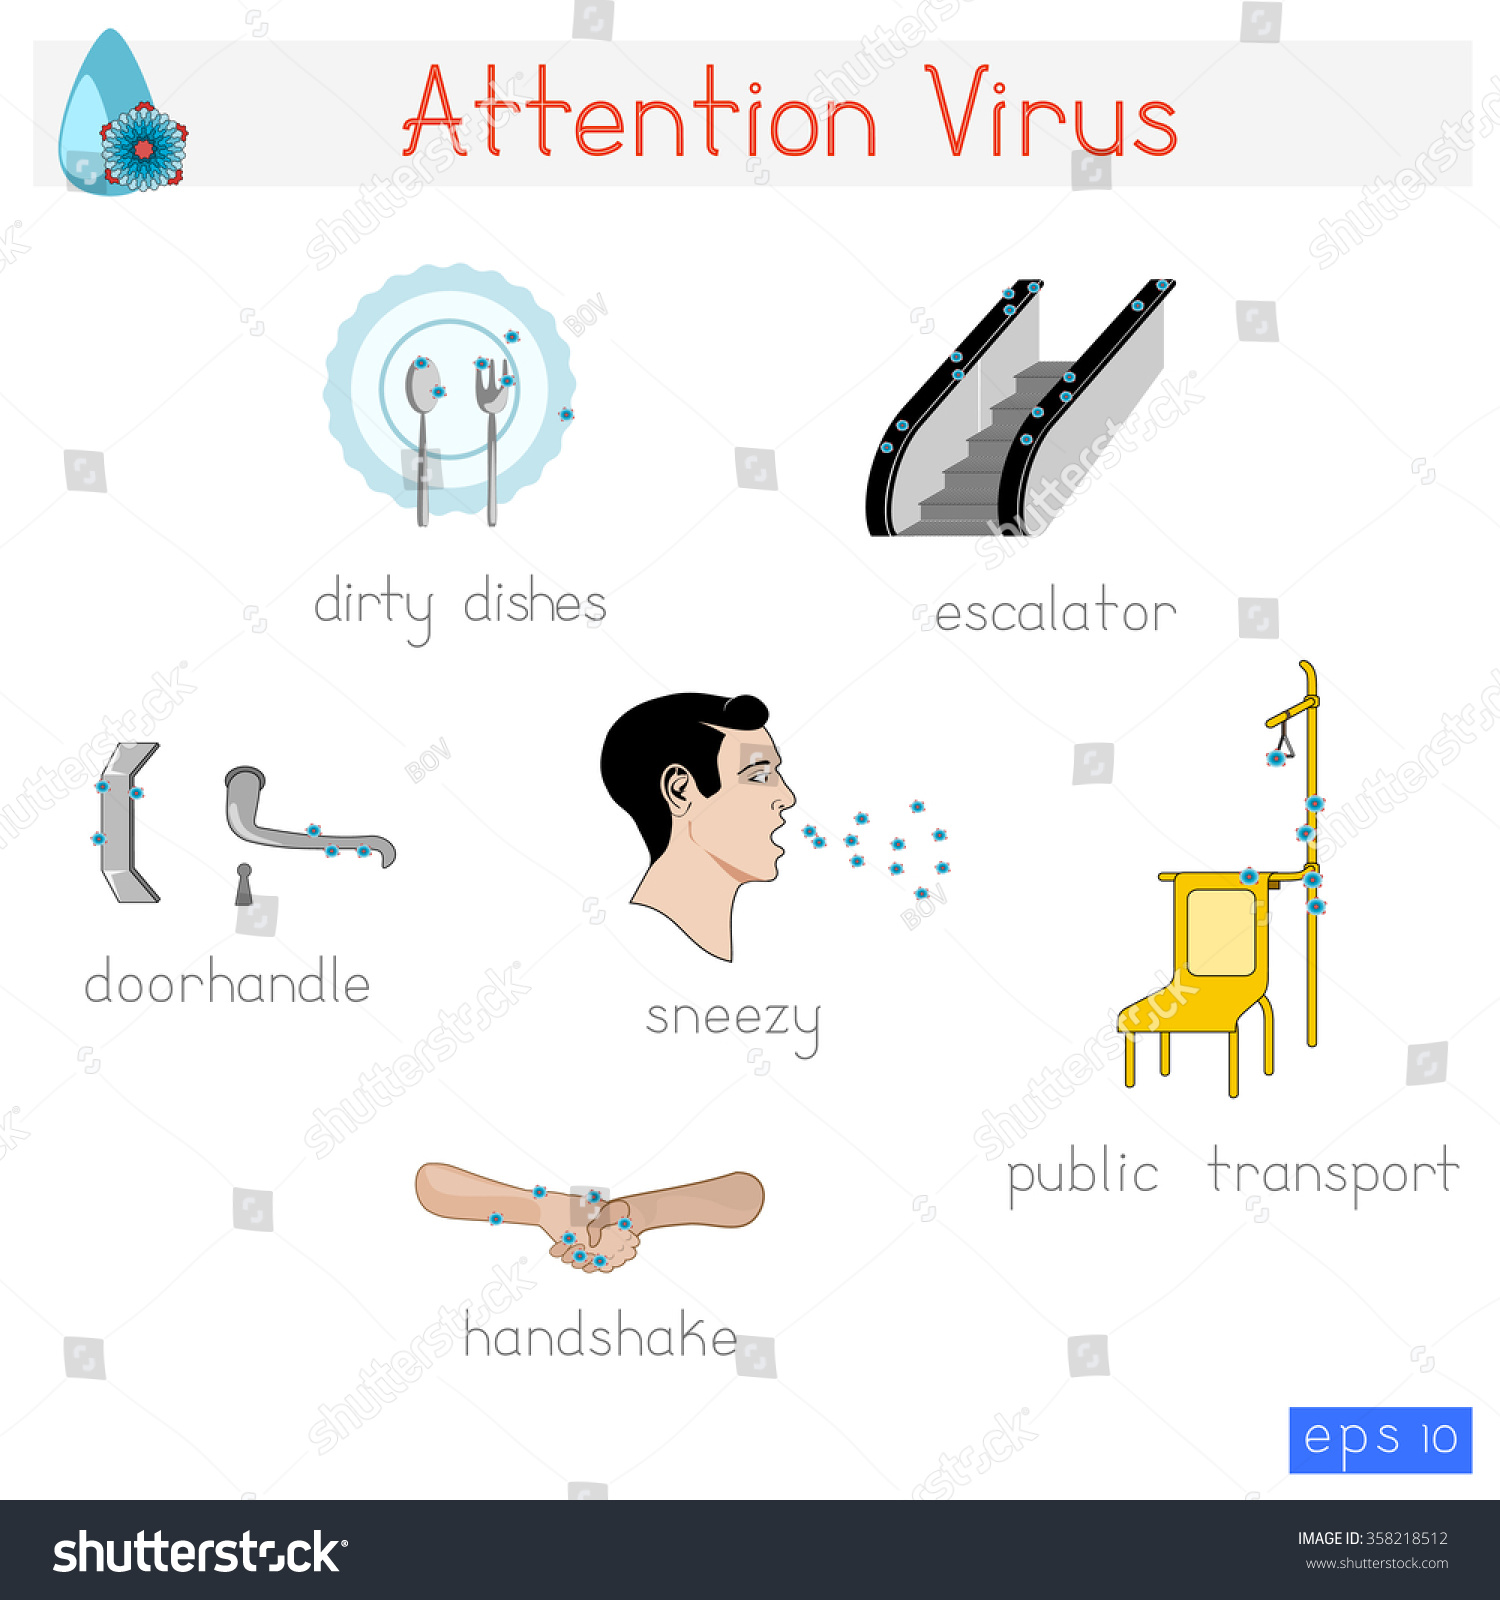 Template Information Poster Showing Way Viruses Stock Vector ...